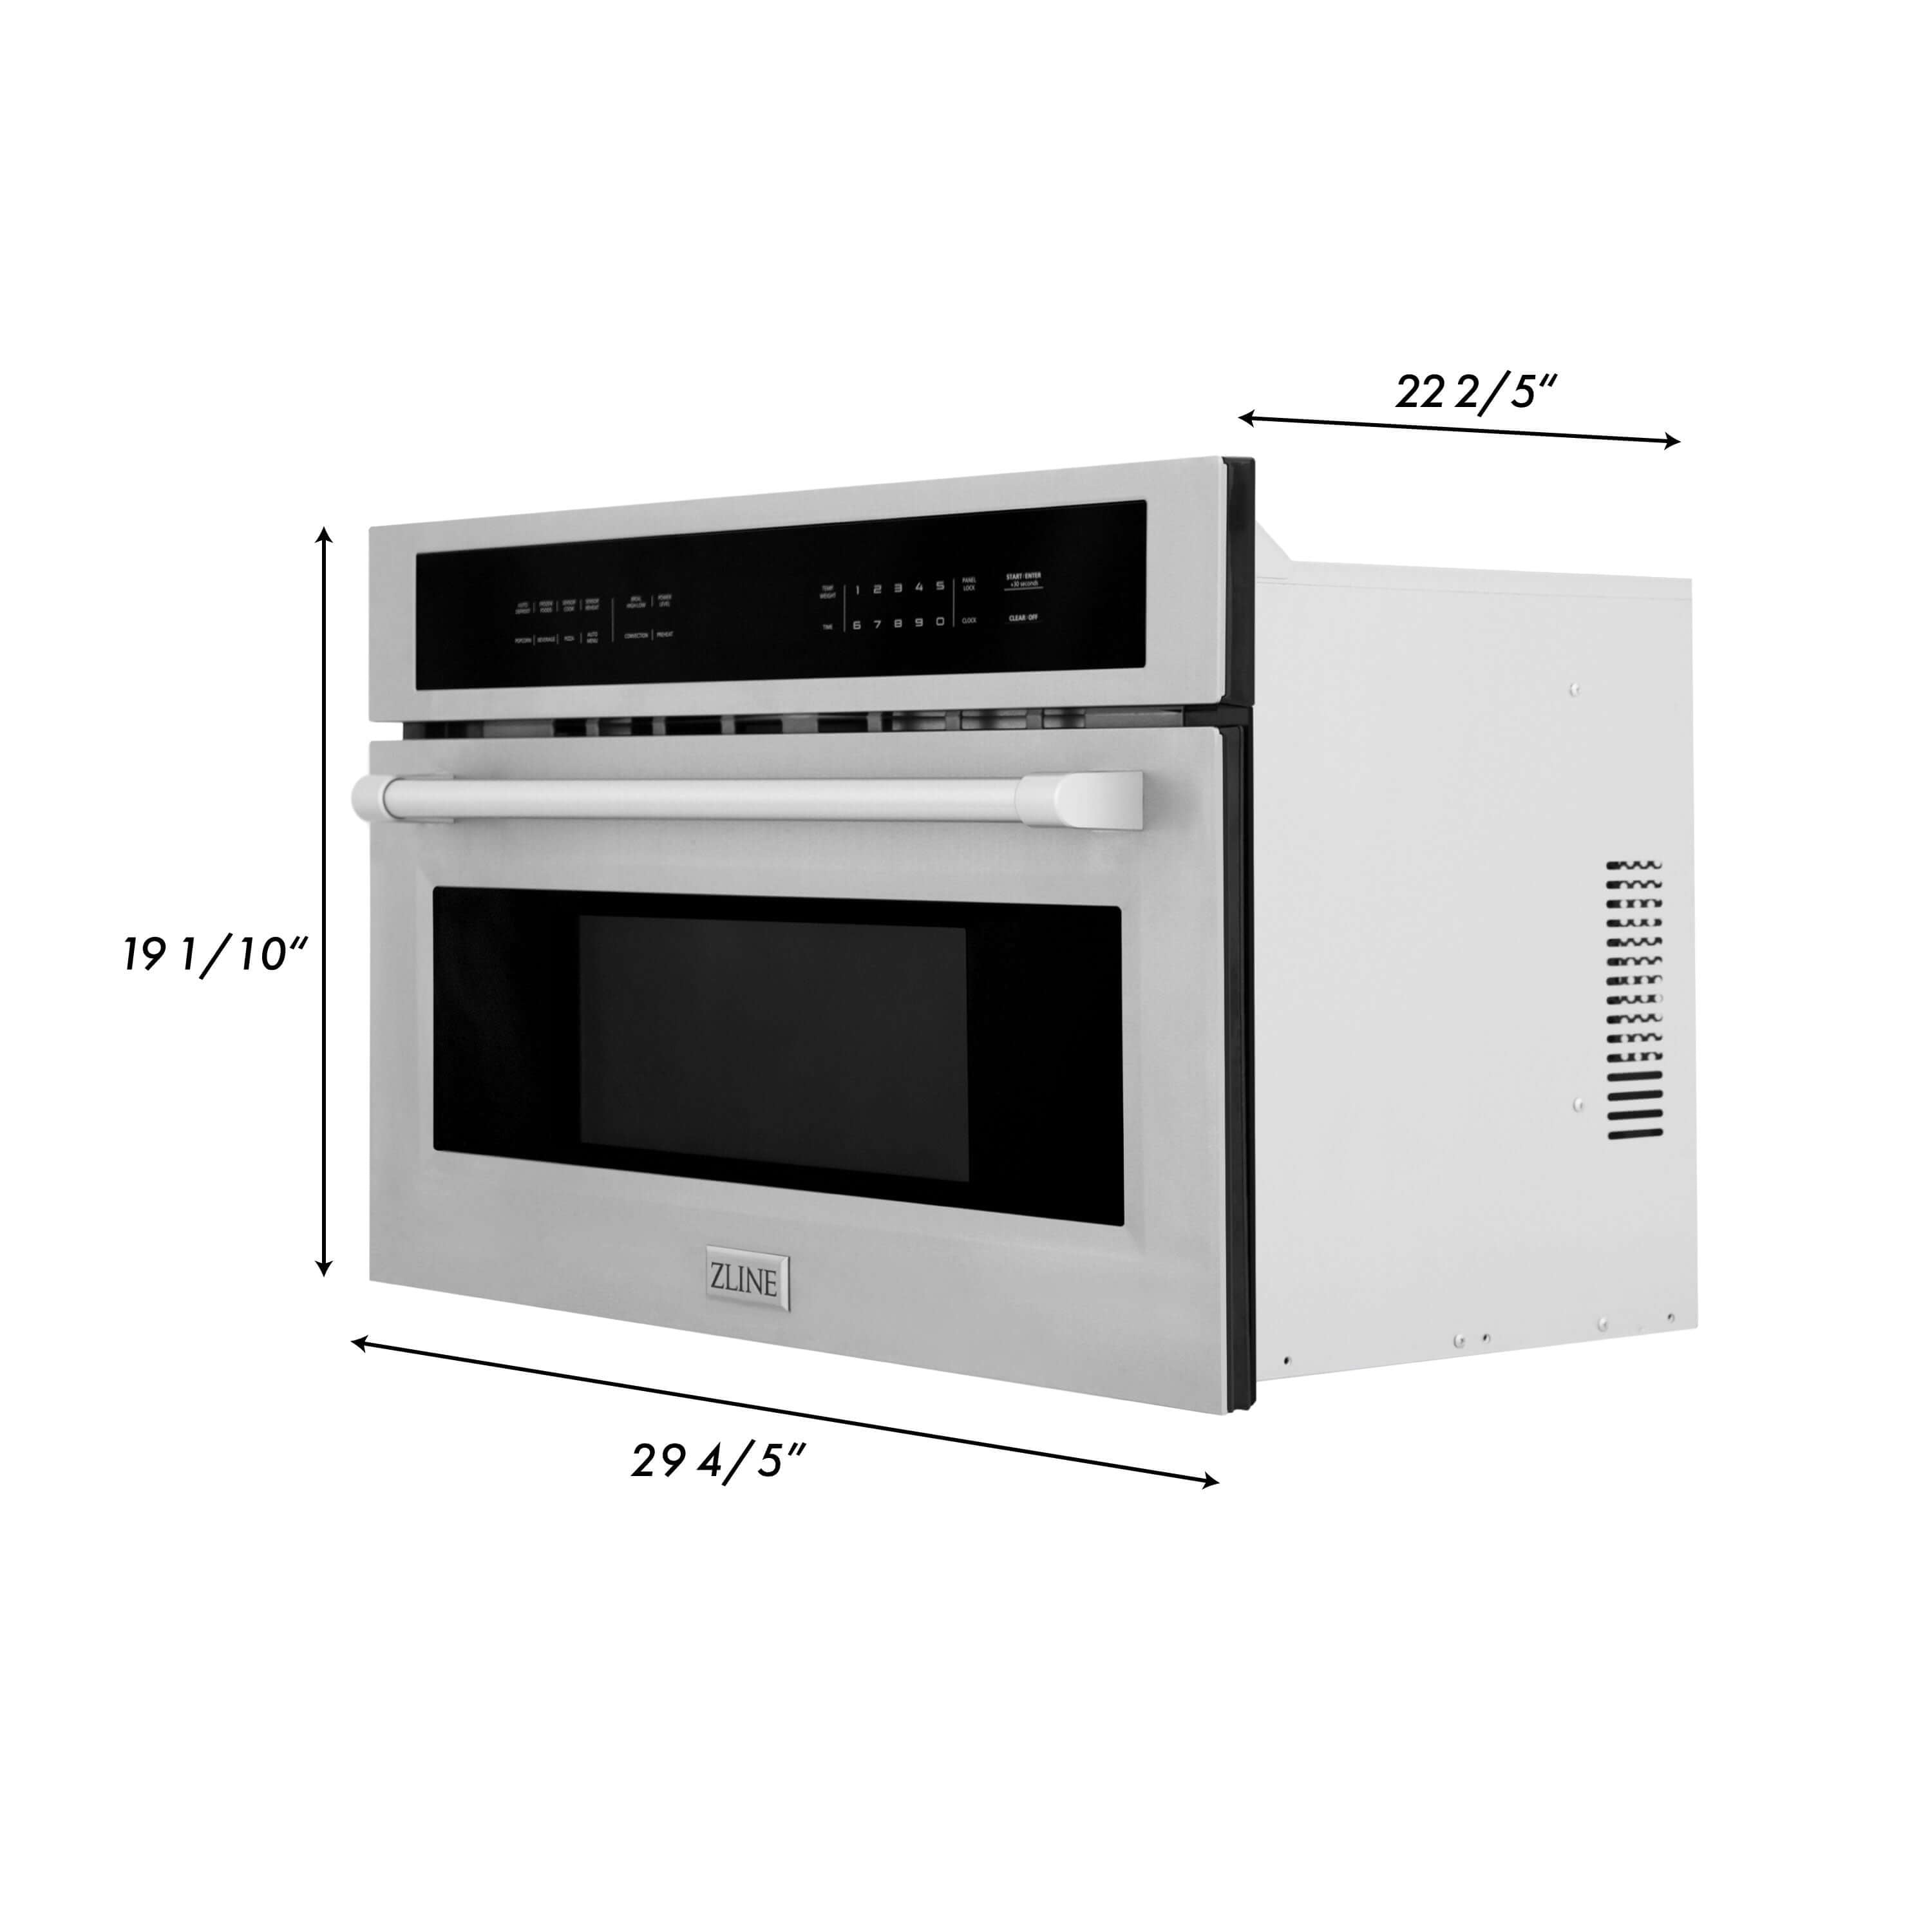 ZLINE Stainless Steel 30" Built-in Convection Microwave Oven and 30" Single Wall Oven with Self Clean